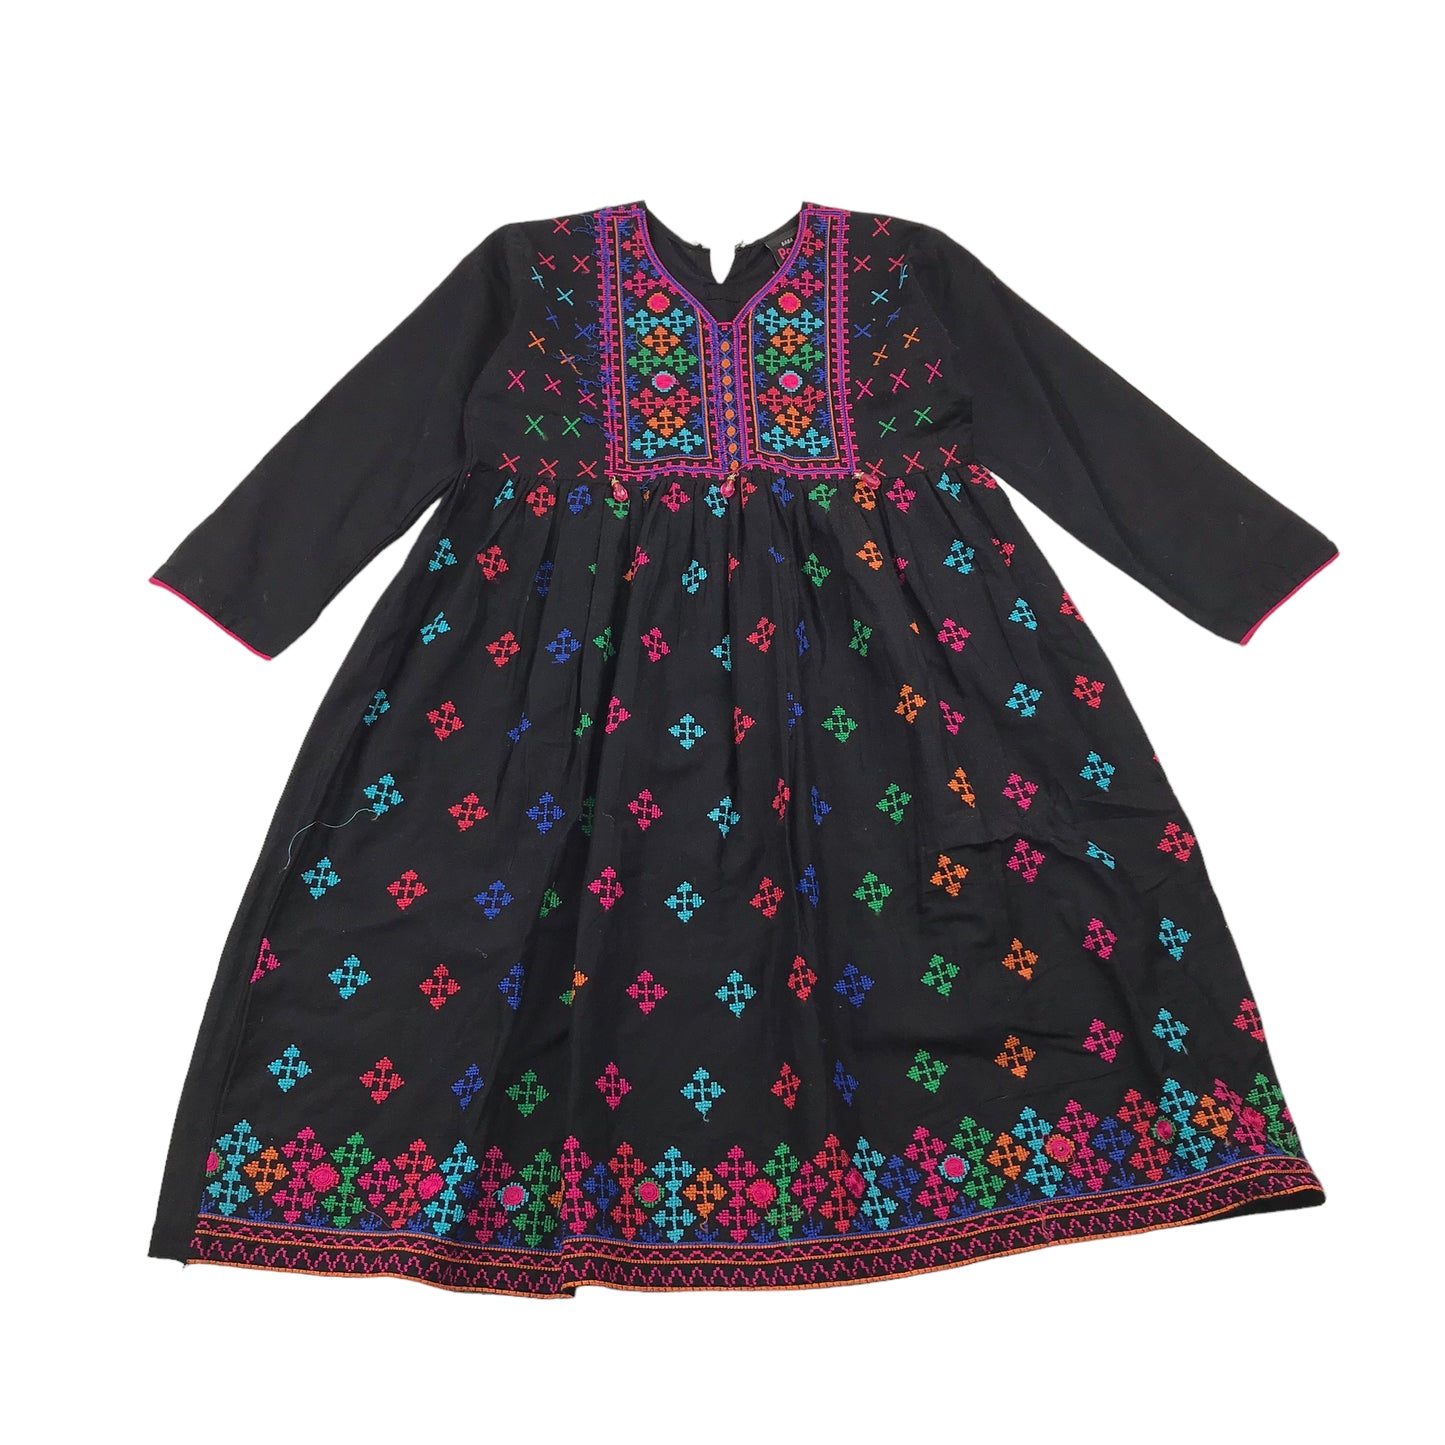 BABA Bosh Black Multicolour Embroidery Tunic and Trumpet Trousers Age 8-9